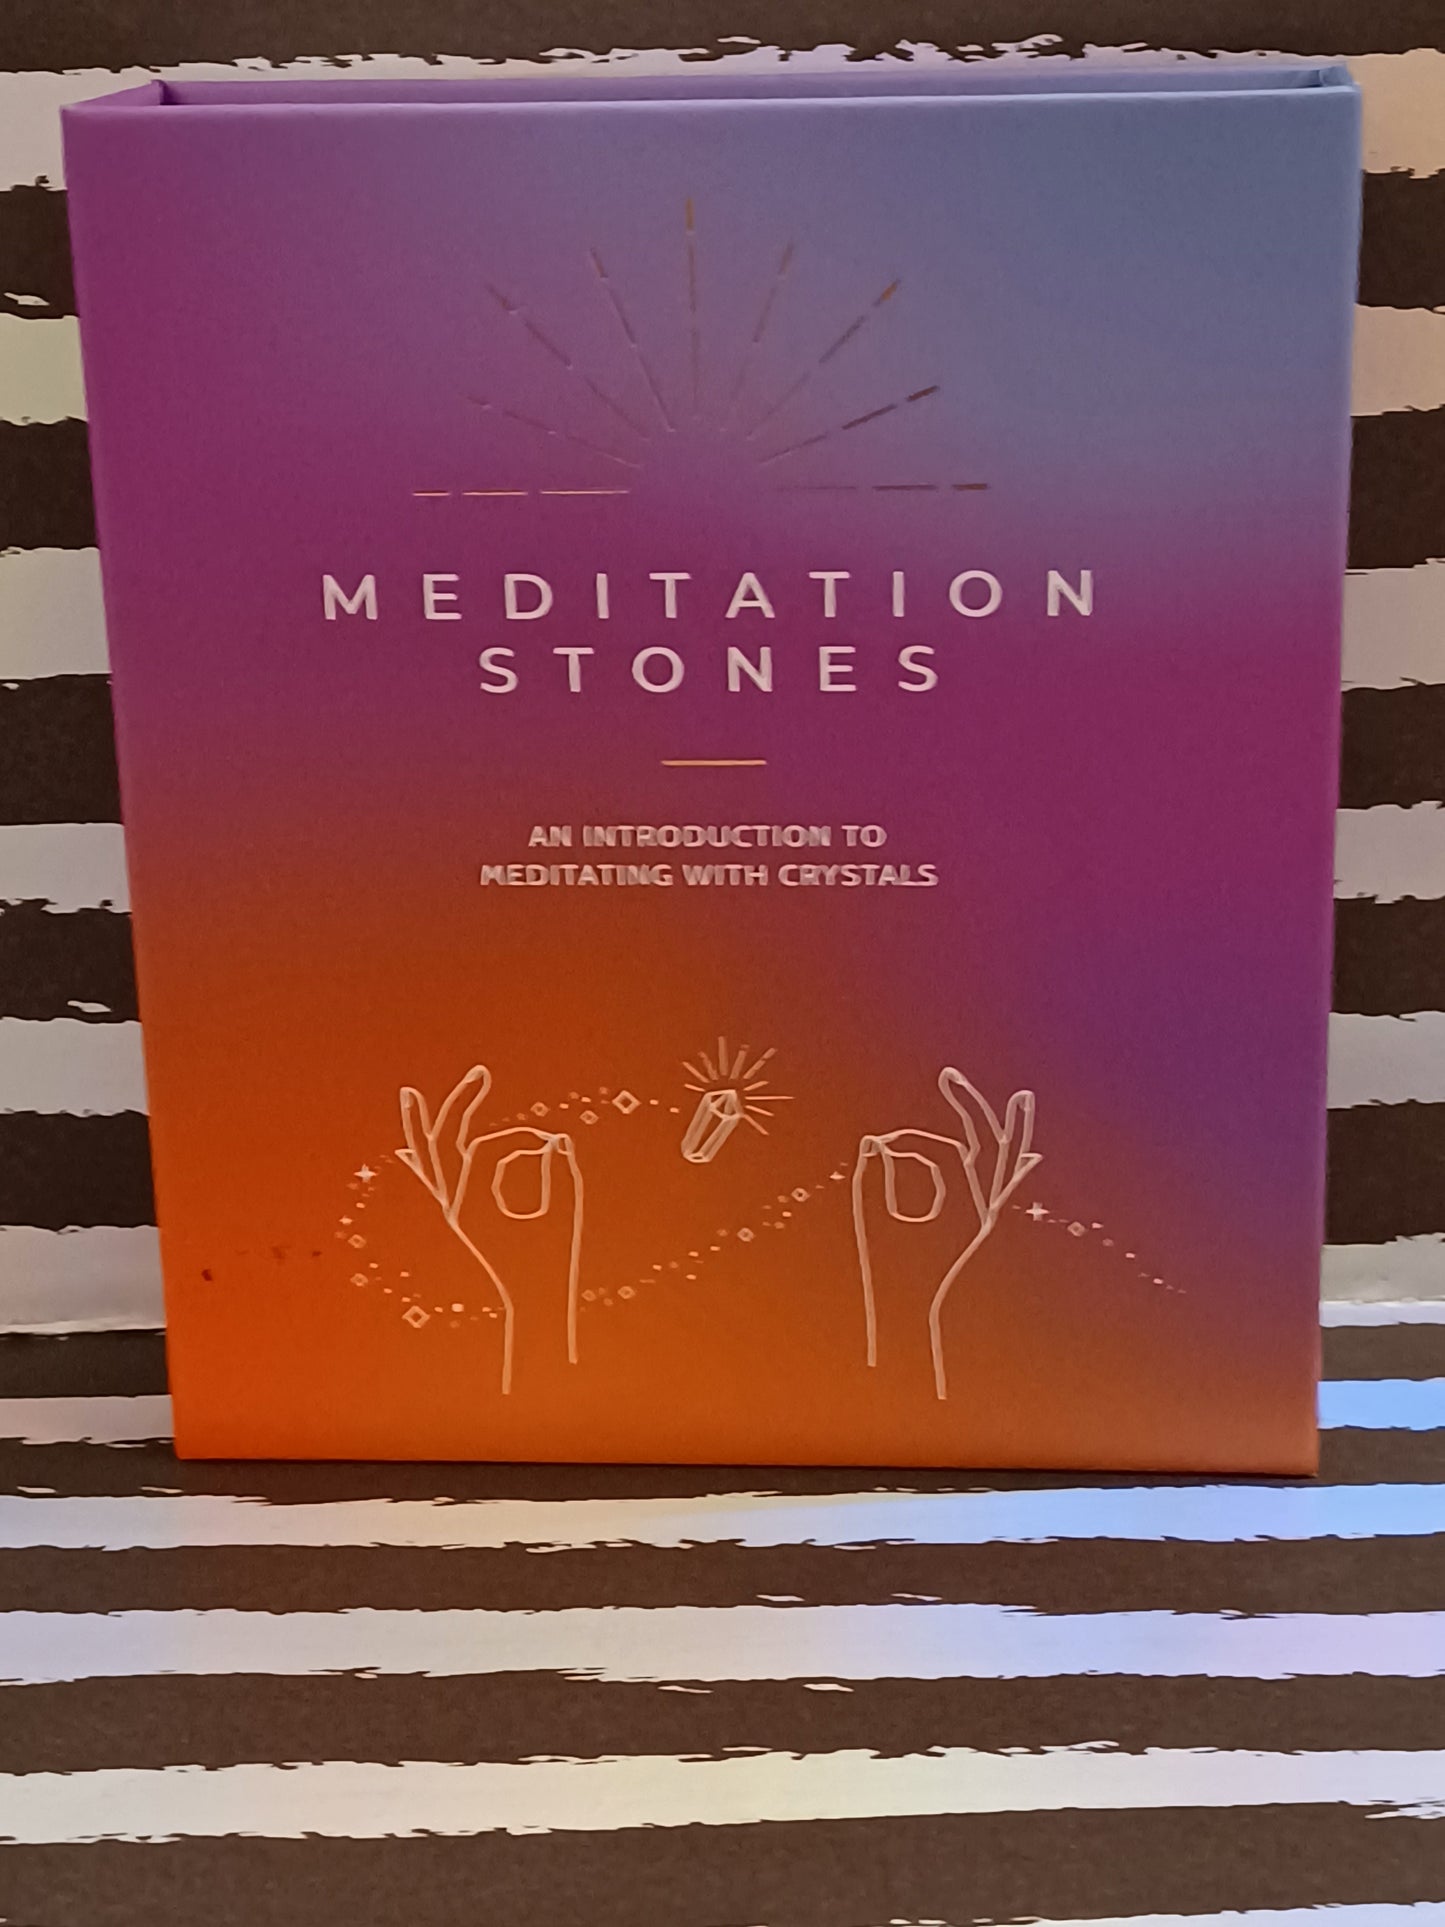 Meditation Stones: An Introduction To Meditating With Crystals